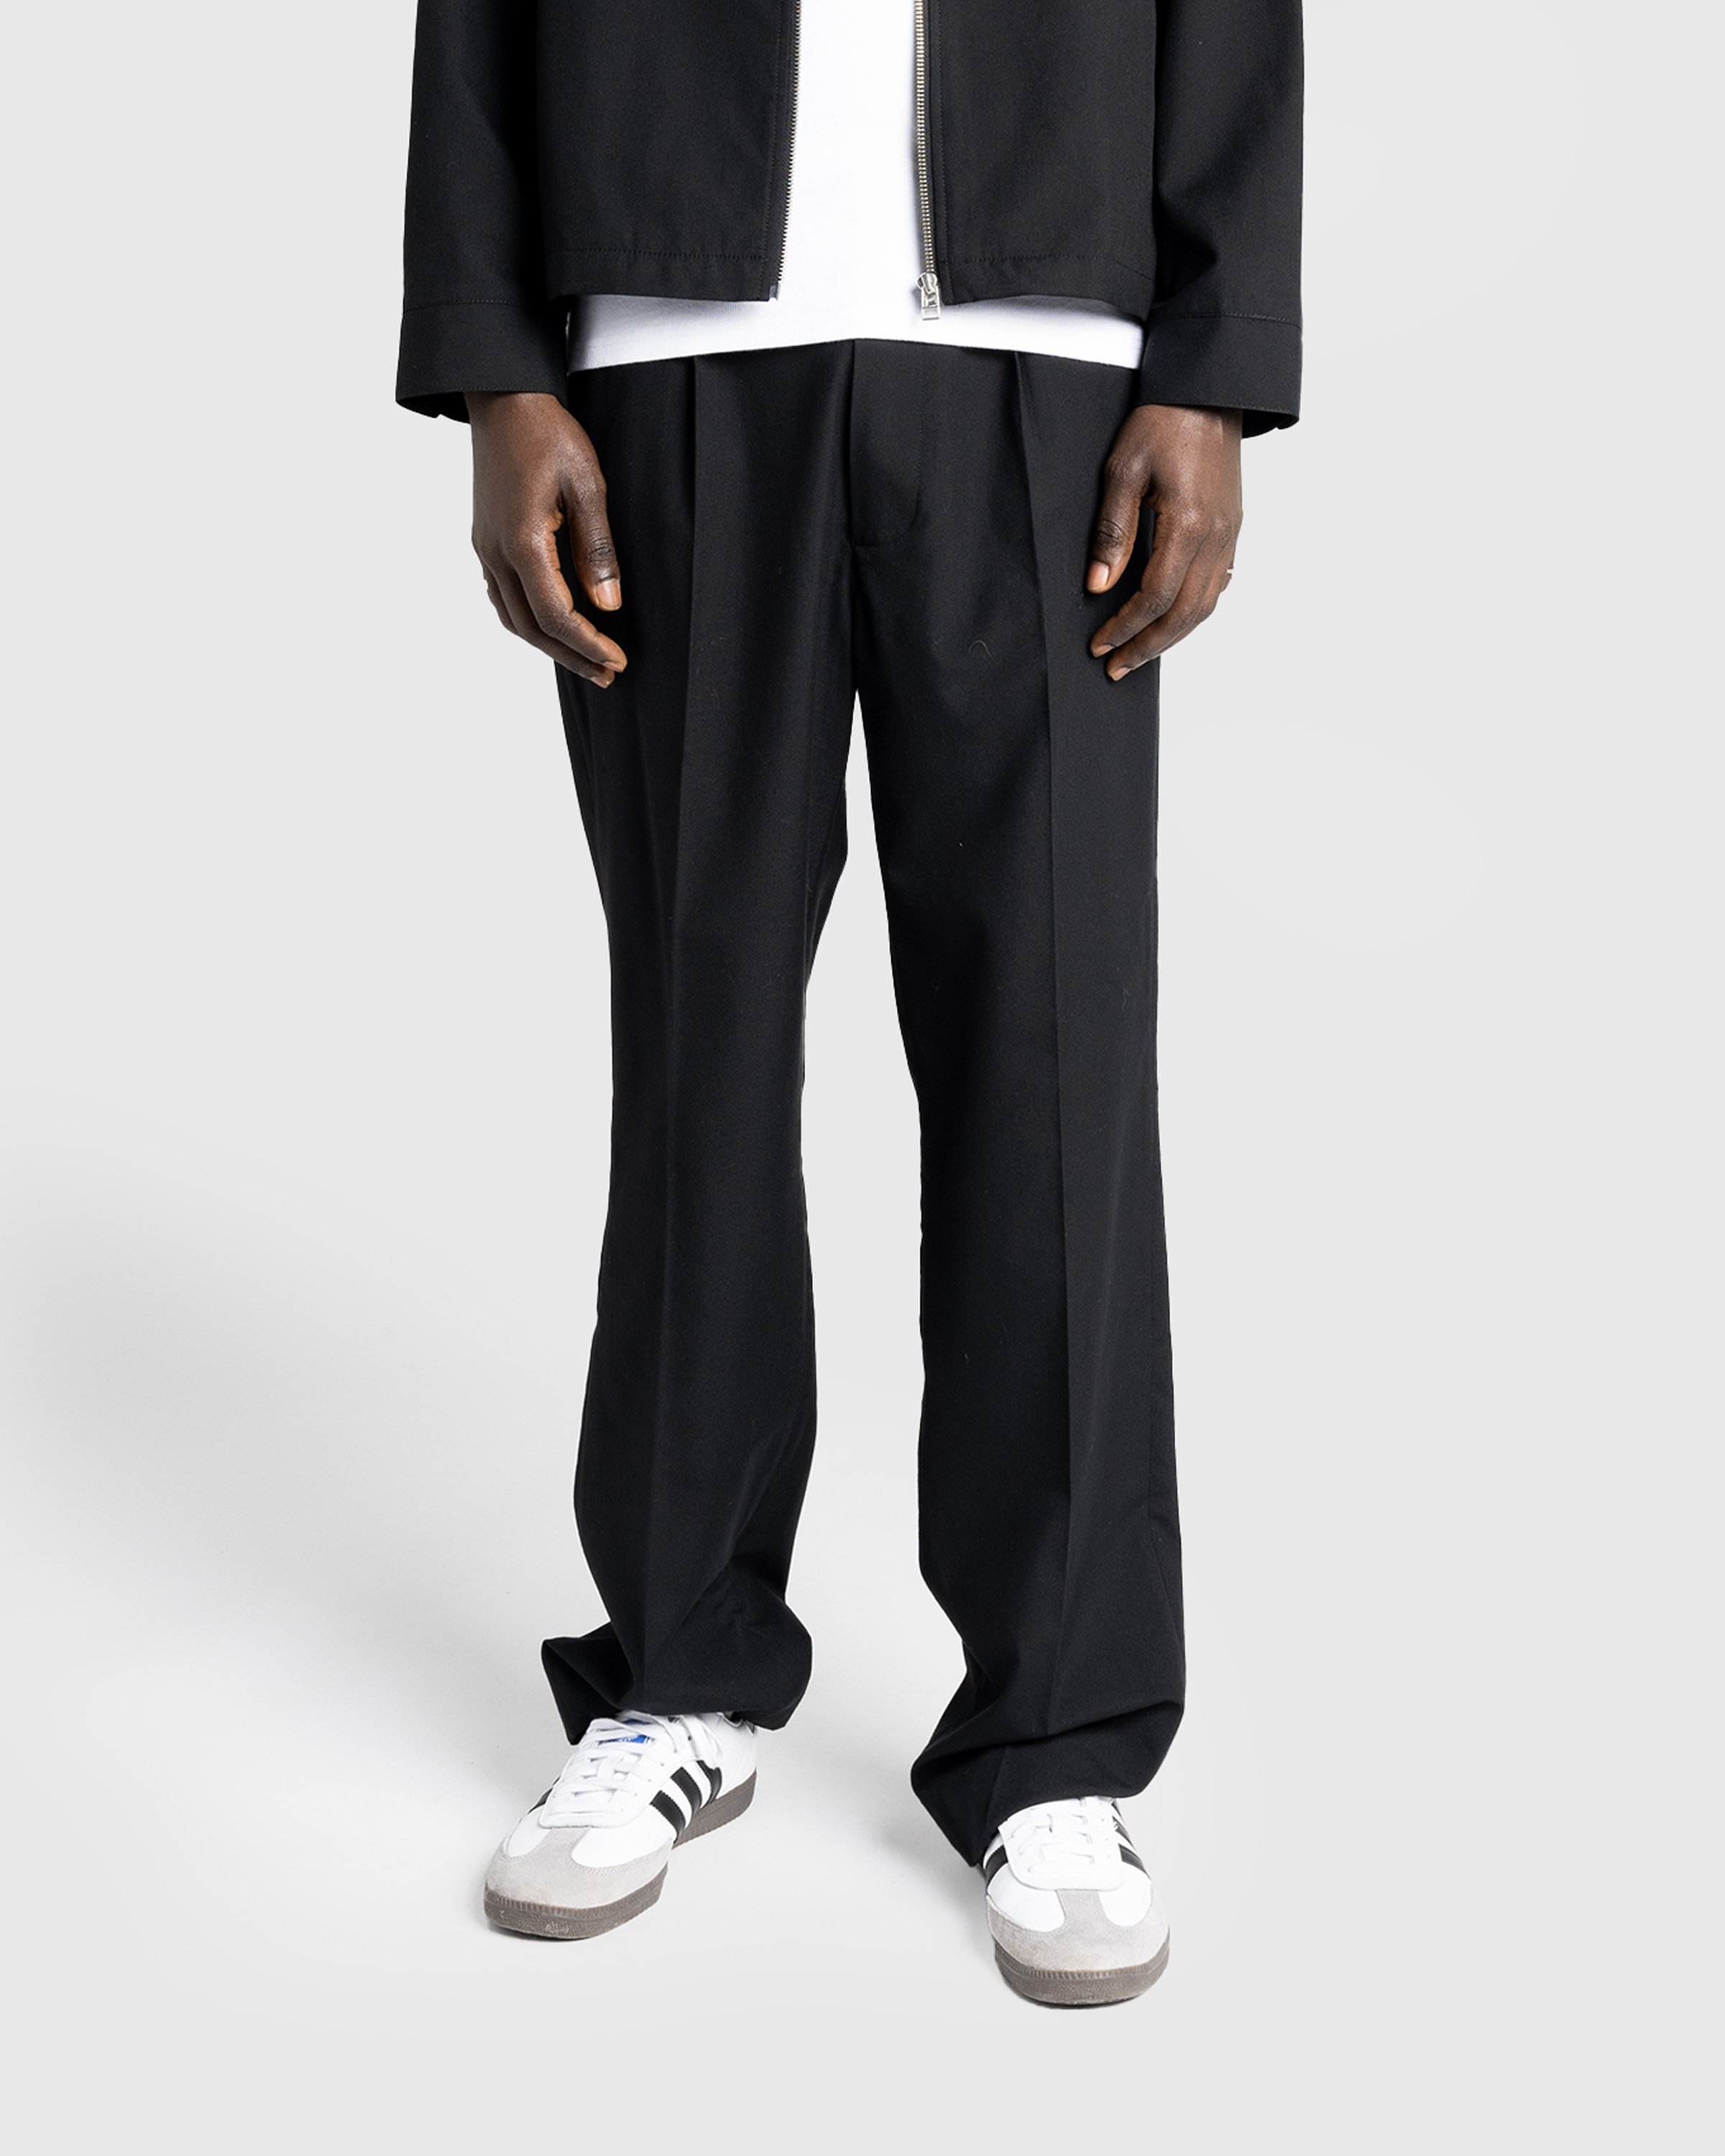 Highsnobiety HS05 - Tropical Suiting Pants - Clothing - Black - Image 3